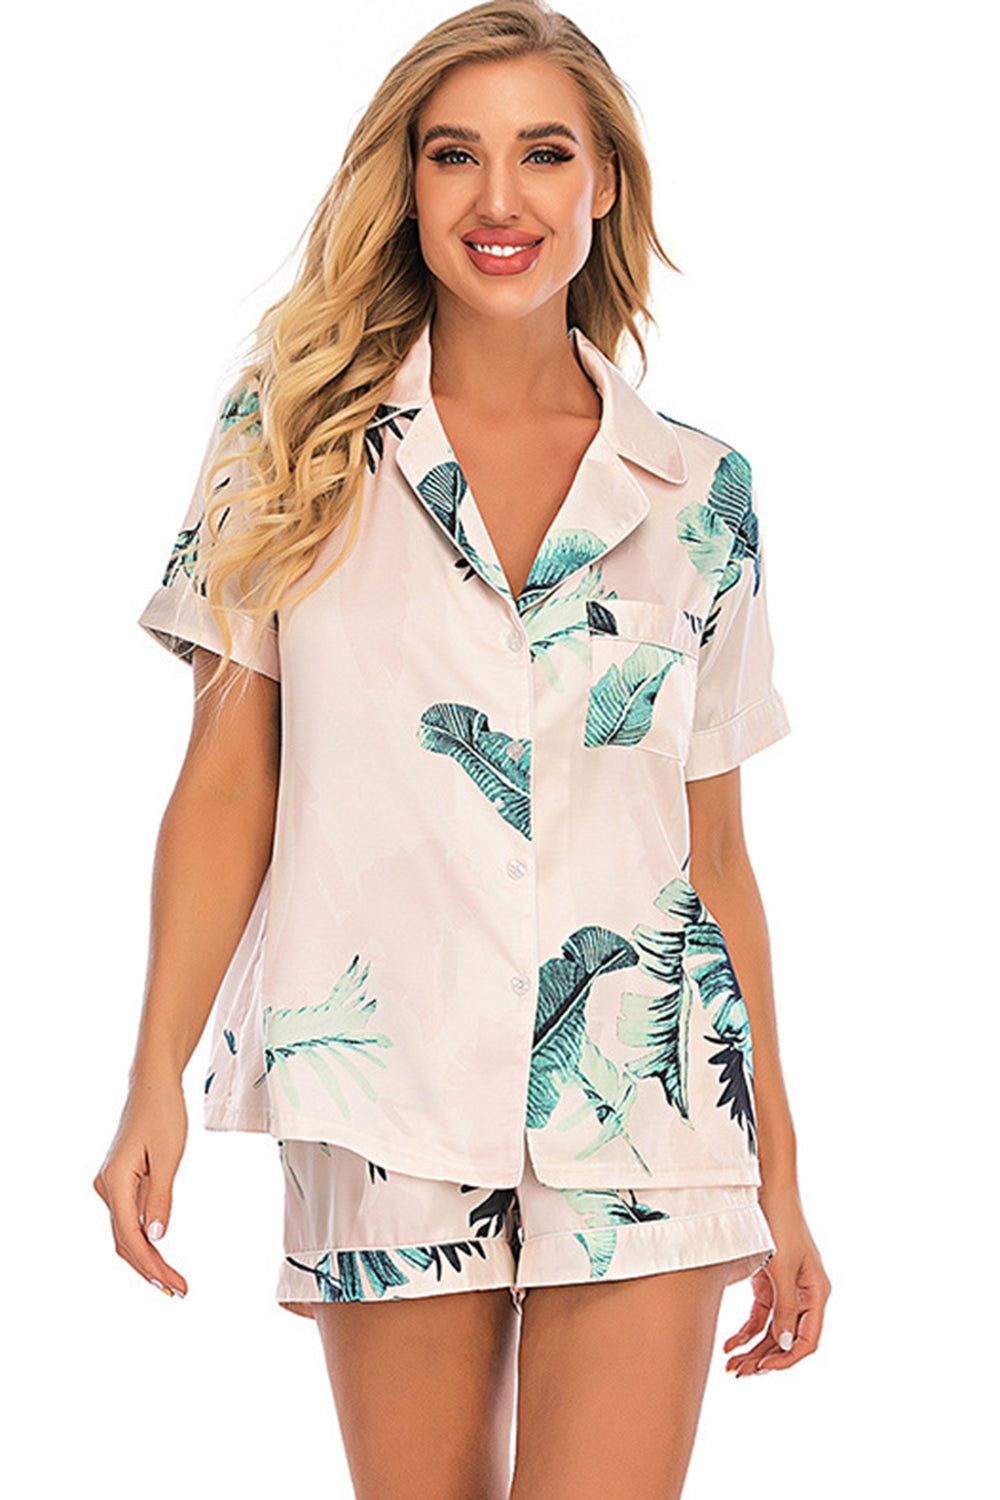 Indulge in comfort and style with our Button Up Top and Shorts Lounge Set. Soft fabric, chic design, and versatile wear. Perfect for relaxation.